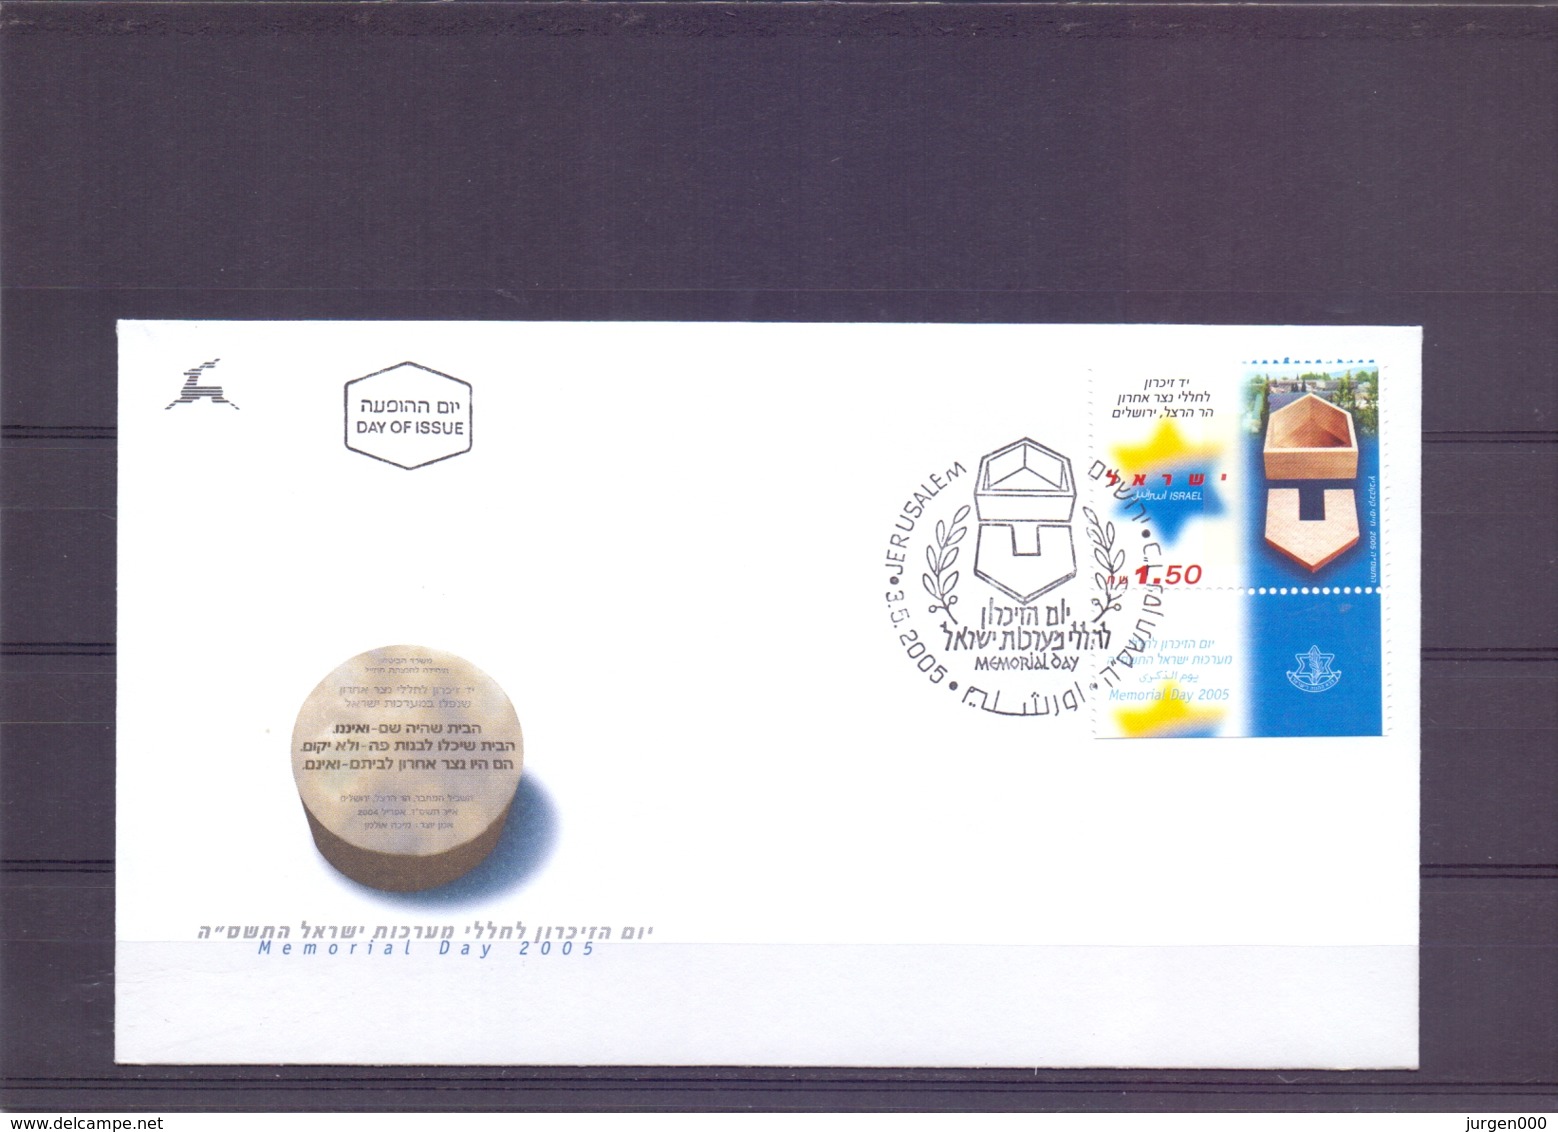 Israel - FDC - Memorial Day - Jerusalem 3/5/2005   (RM14811) - Covers & Documents